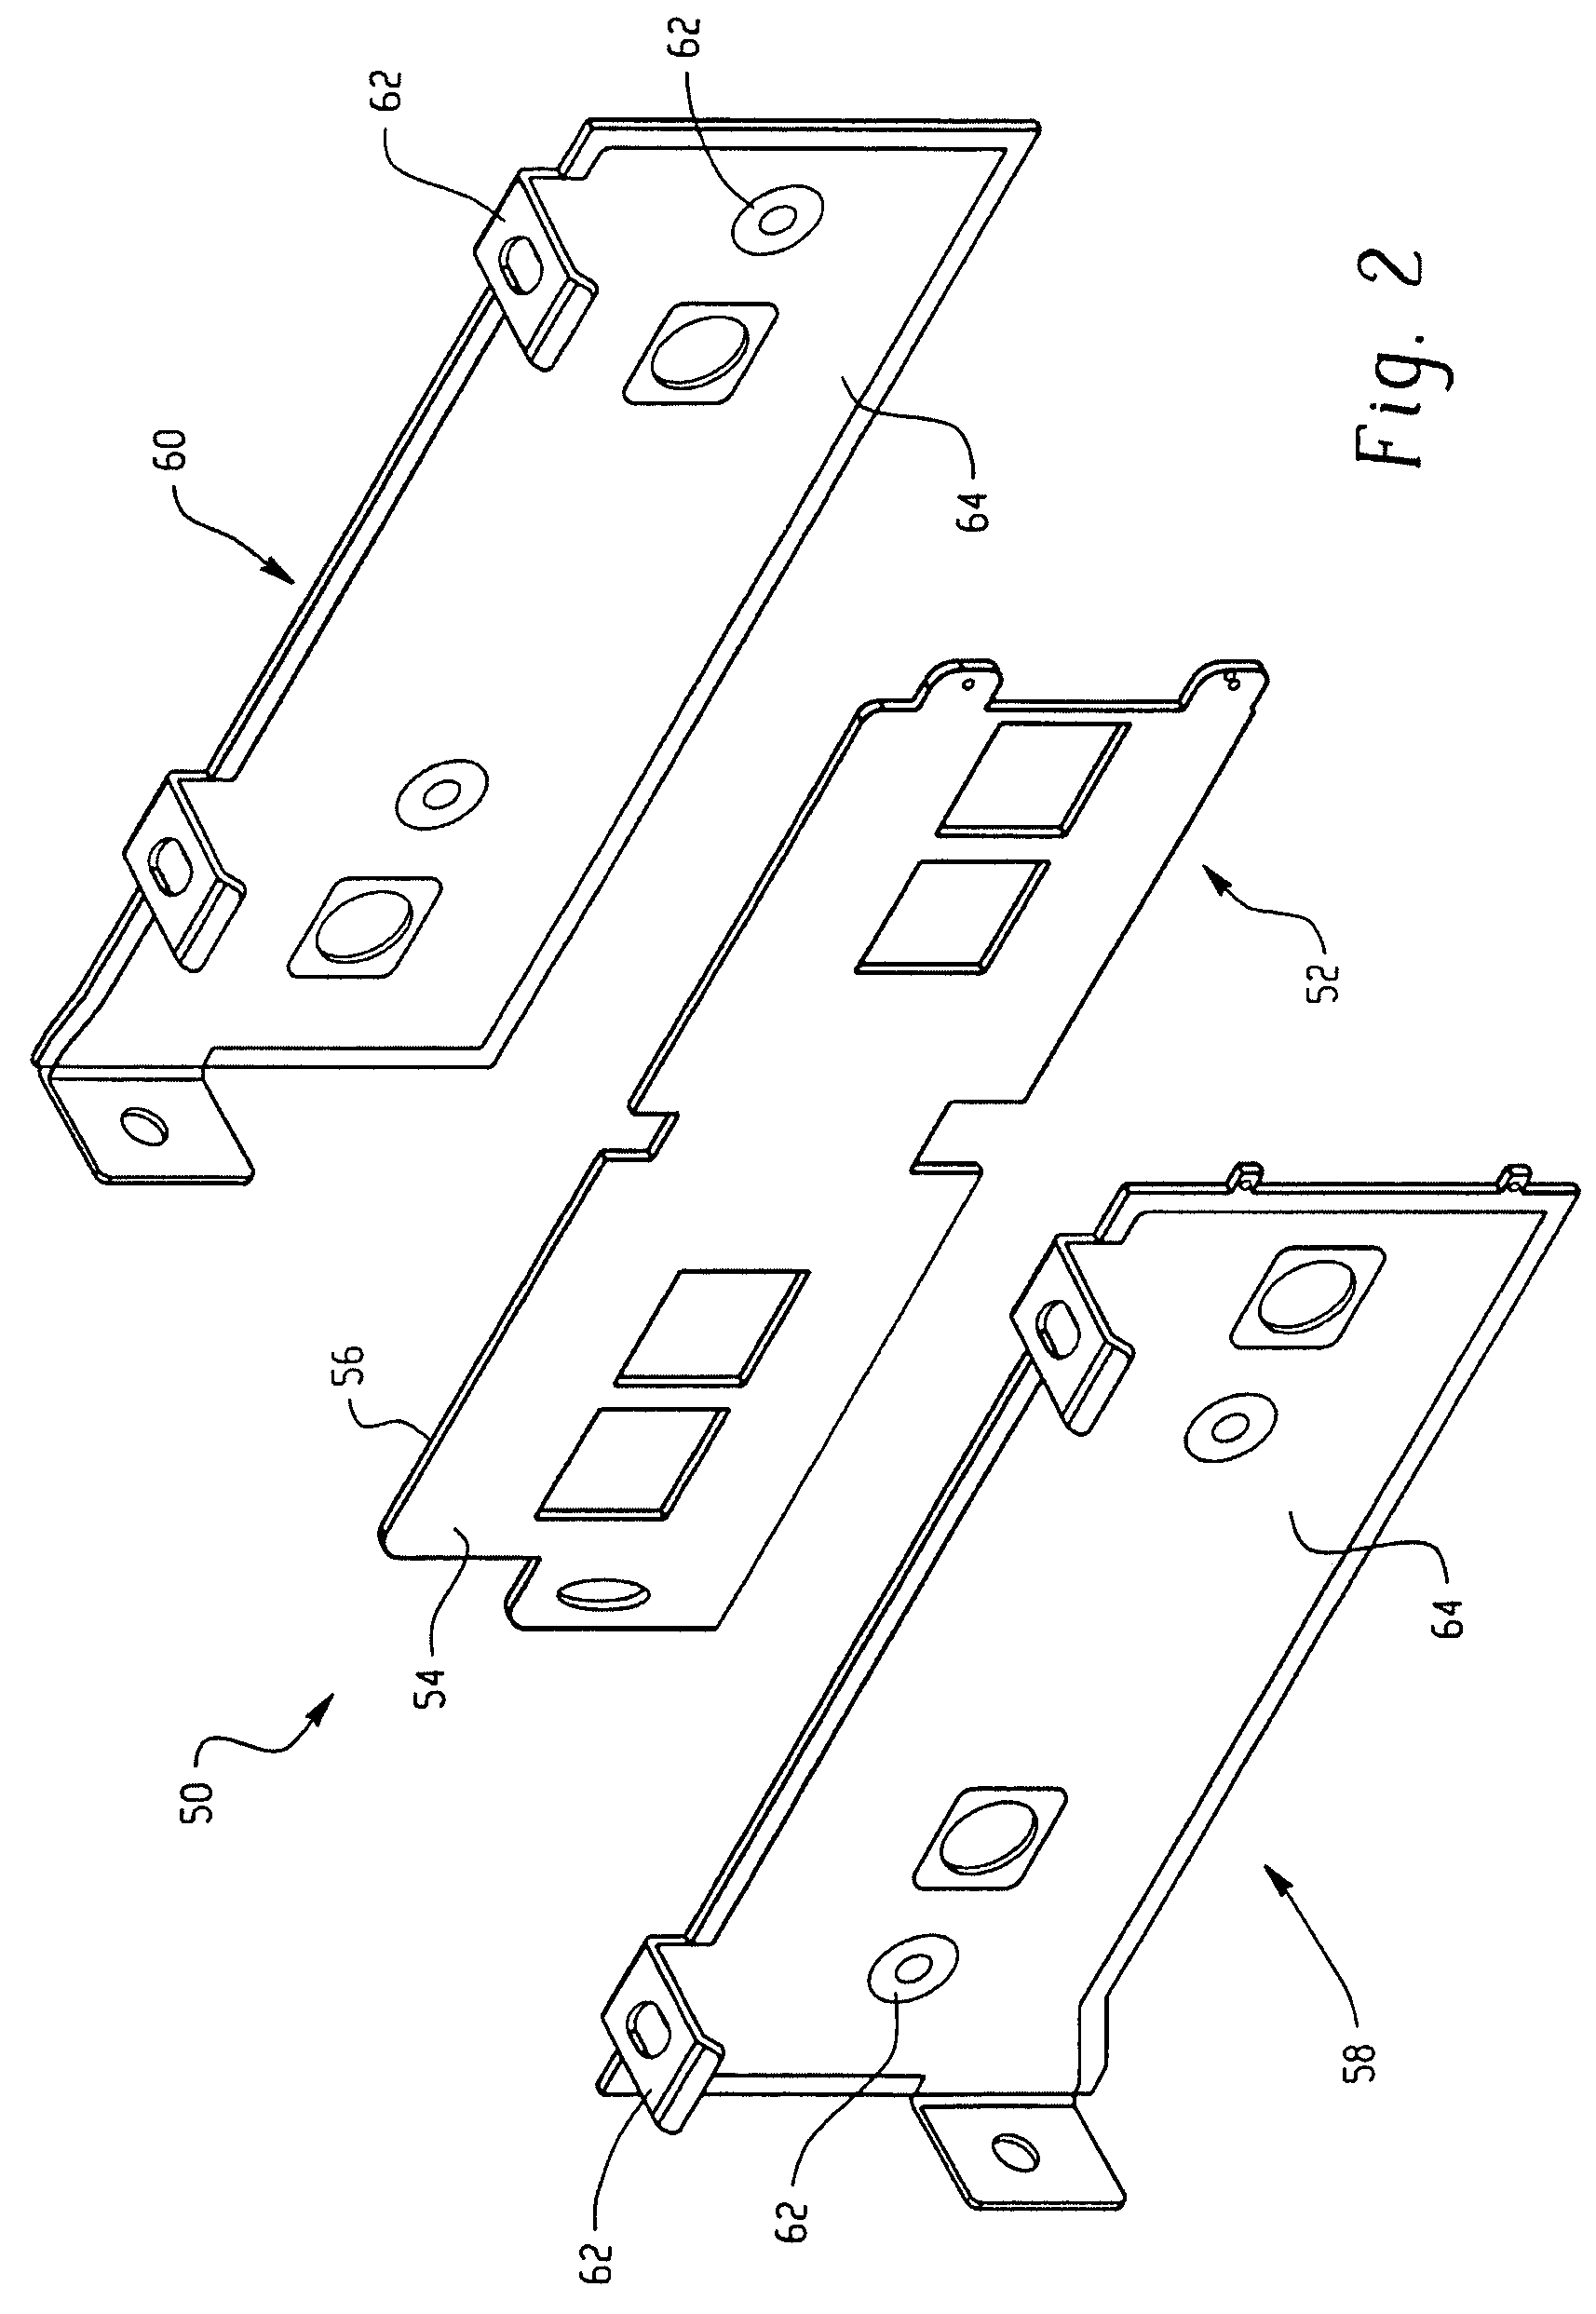 Laminated bus bars and methods of manufacture thereof